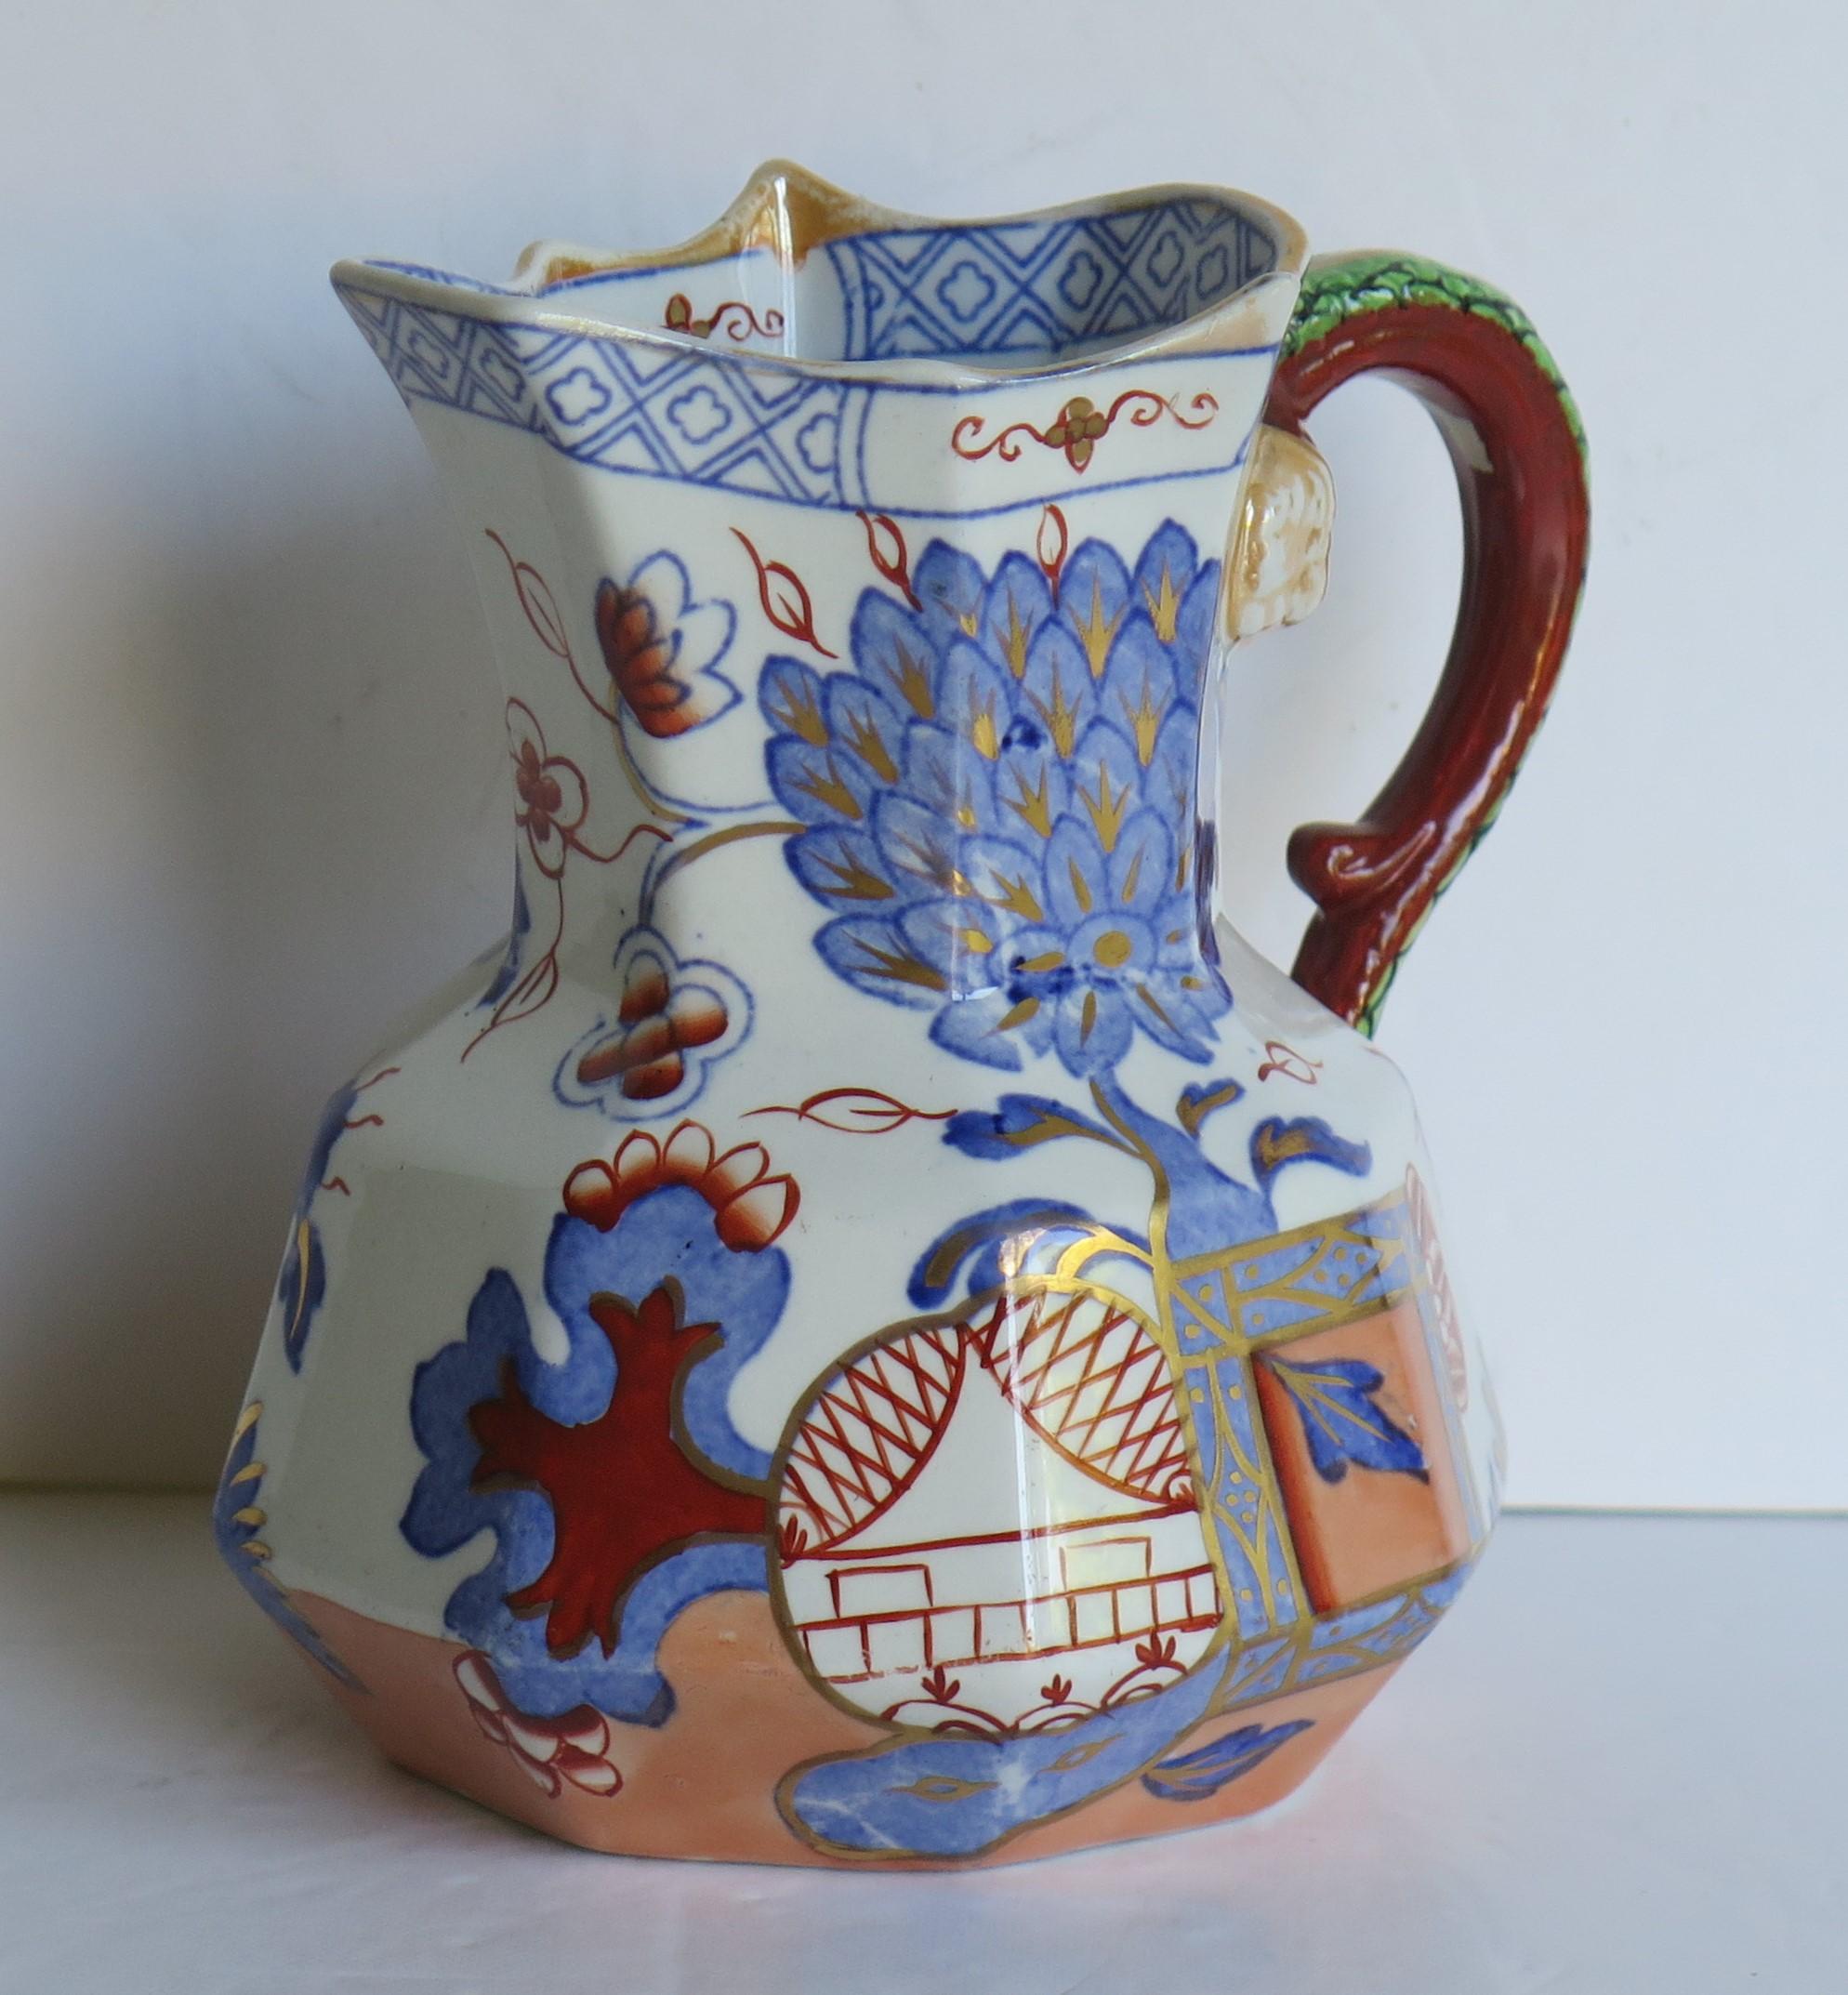 Chinoiserie Mason's Ironstone Hydra Jug or Pitcher in the Jardinière Pattern, circa 1870